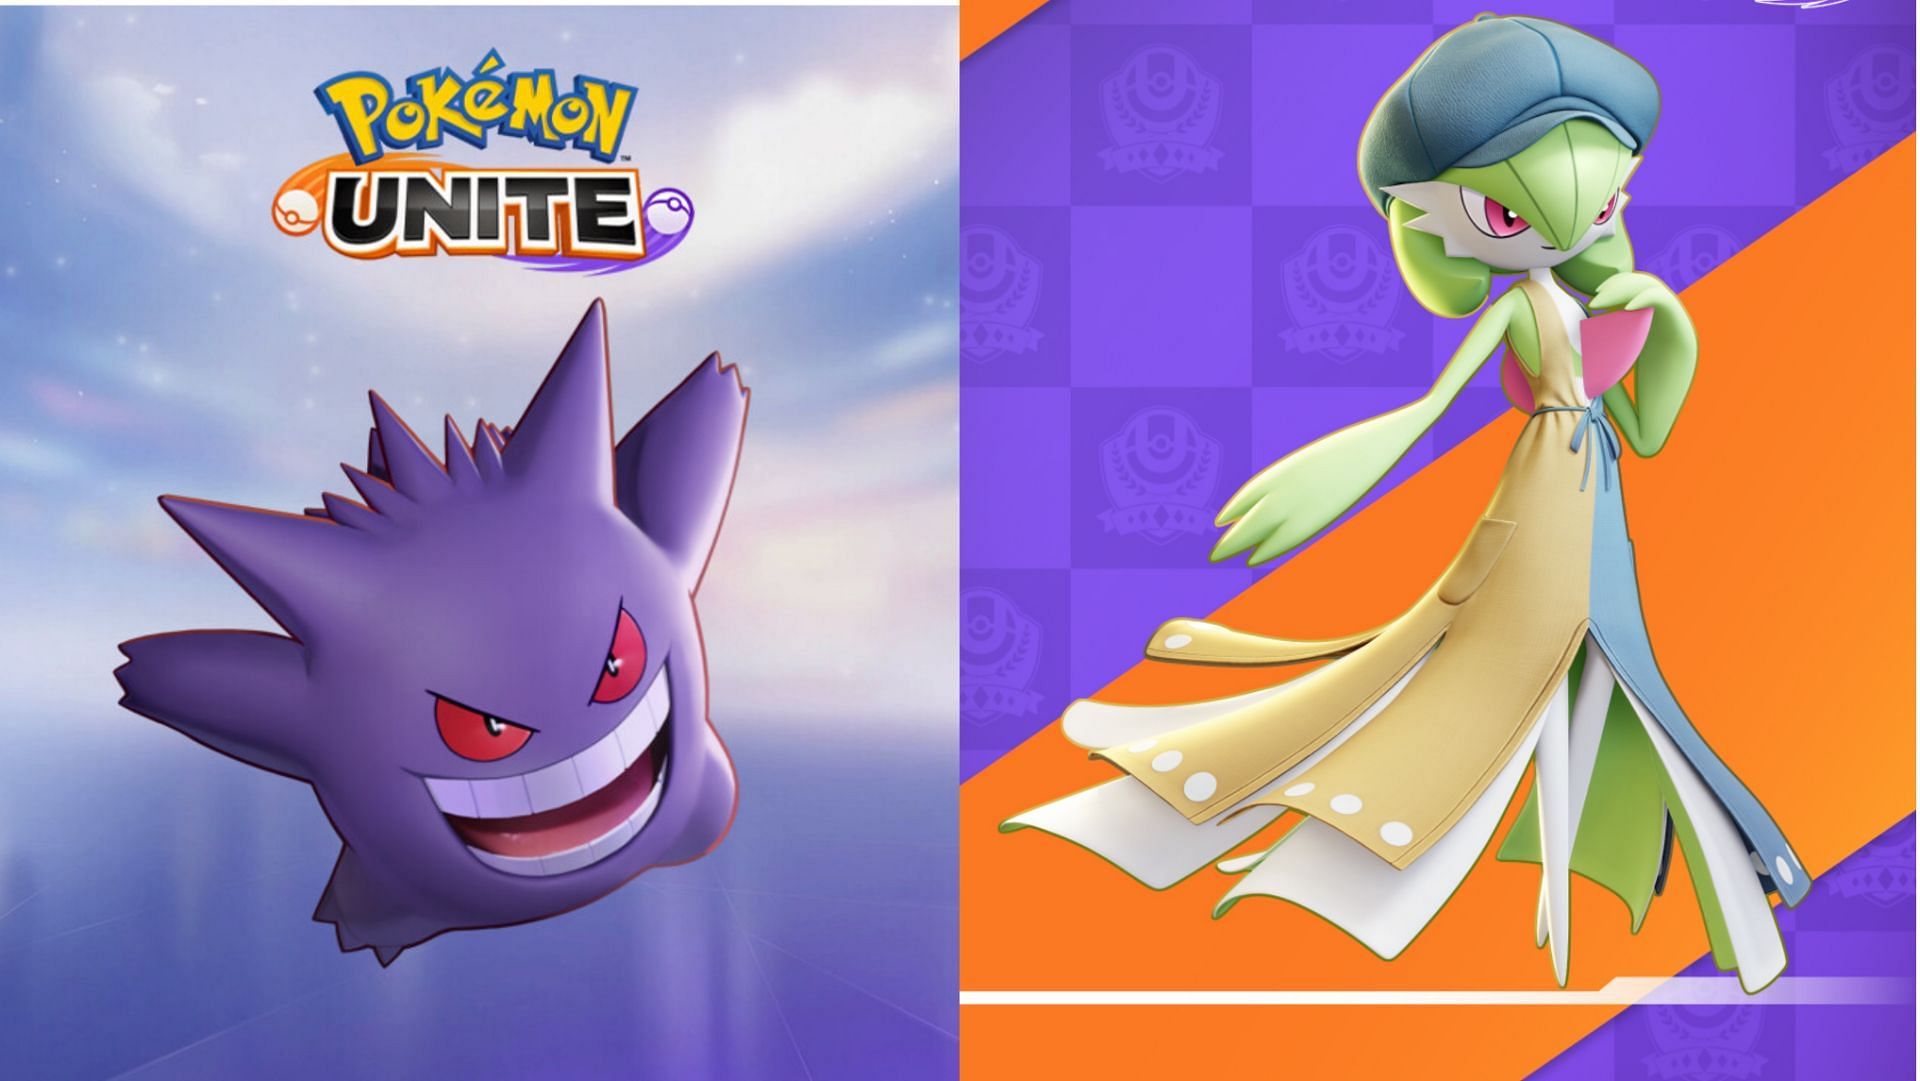 Gengar and Gardevoir are hot favorites to receive special holowears in the upcoming days (Images via The Pokemon Company)